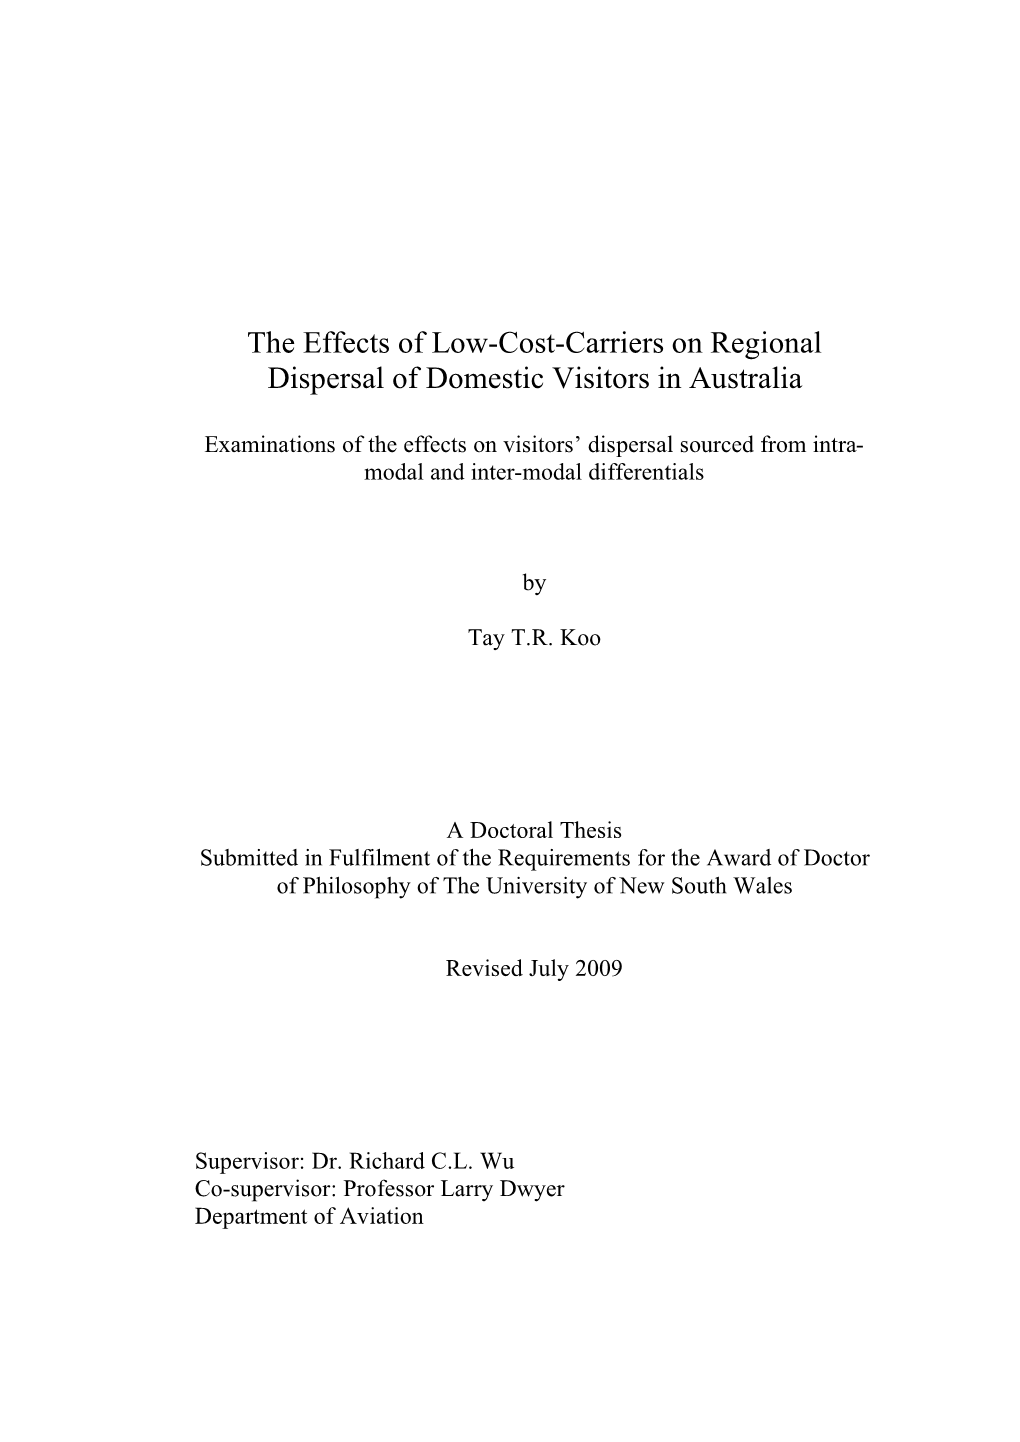 The Effects of Low-Cost-Carriers on Regional Dispersal of Domestic Visitors in Australia